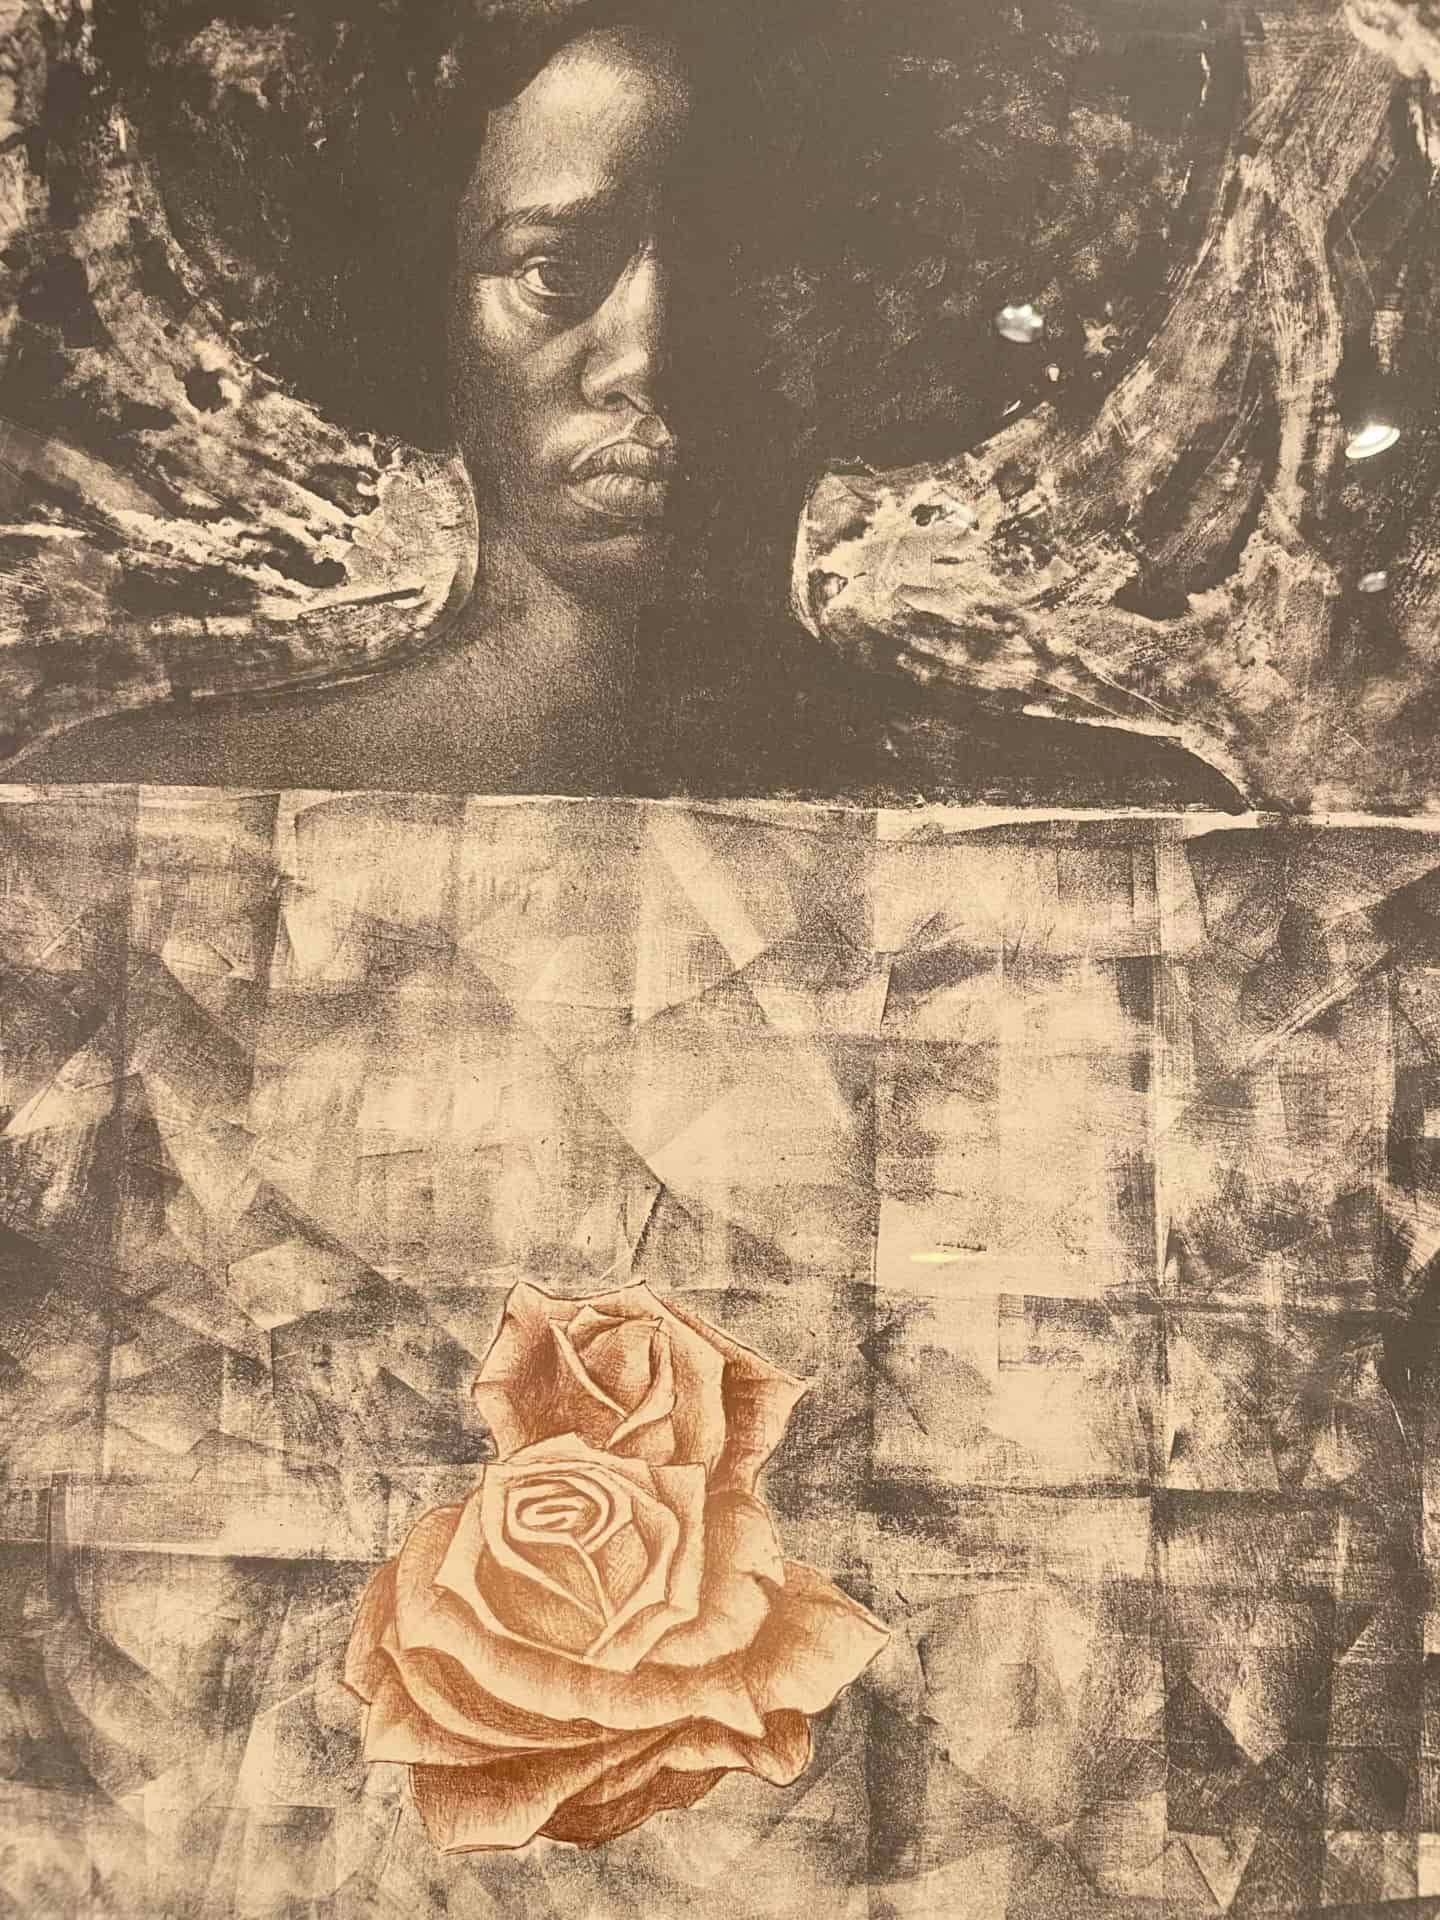 A woman looks squarely and somberley out above a red rose in Charles White's Love Letter #1, a tribute for Civil Rights activist Angela Davis. Press image courtesy of the Norman Rockwell Museum